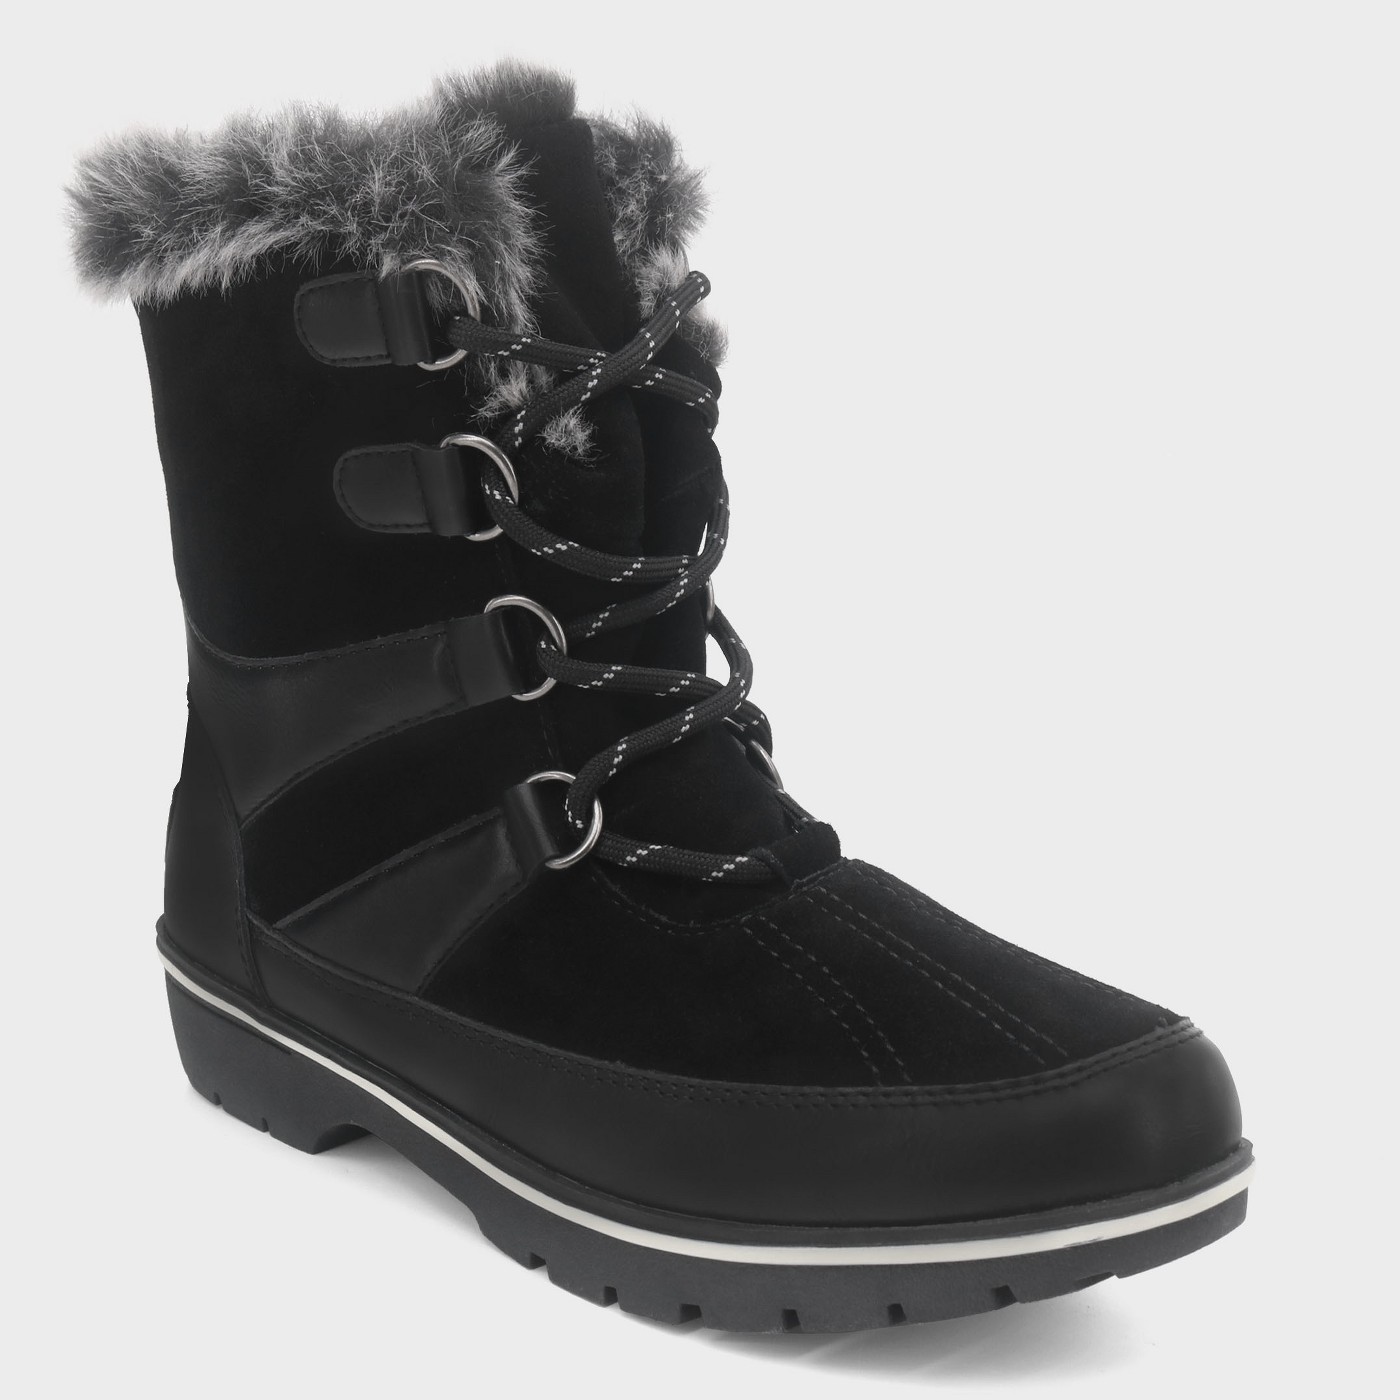 Women's Ellysia Short Functional Winter Boots - C9 ChampionÂ® - image 1 of 3